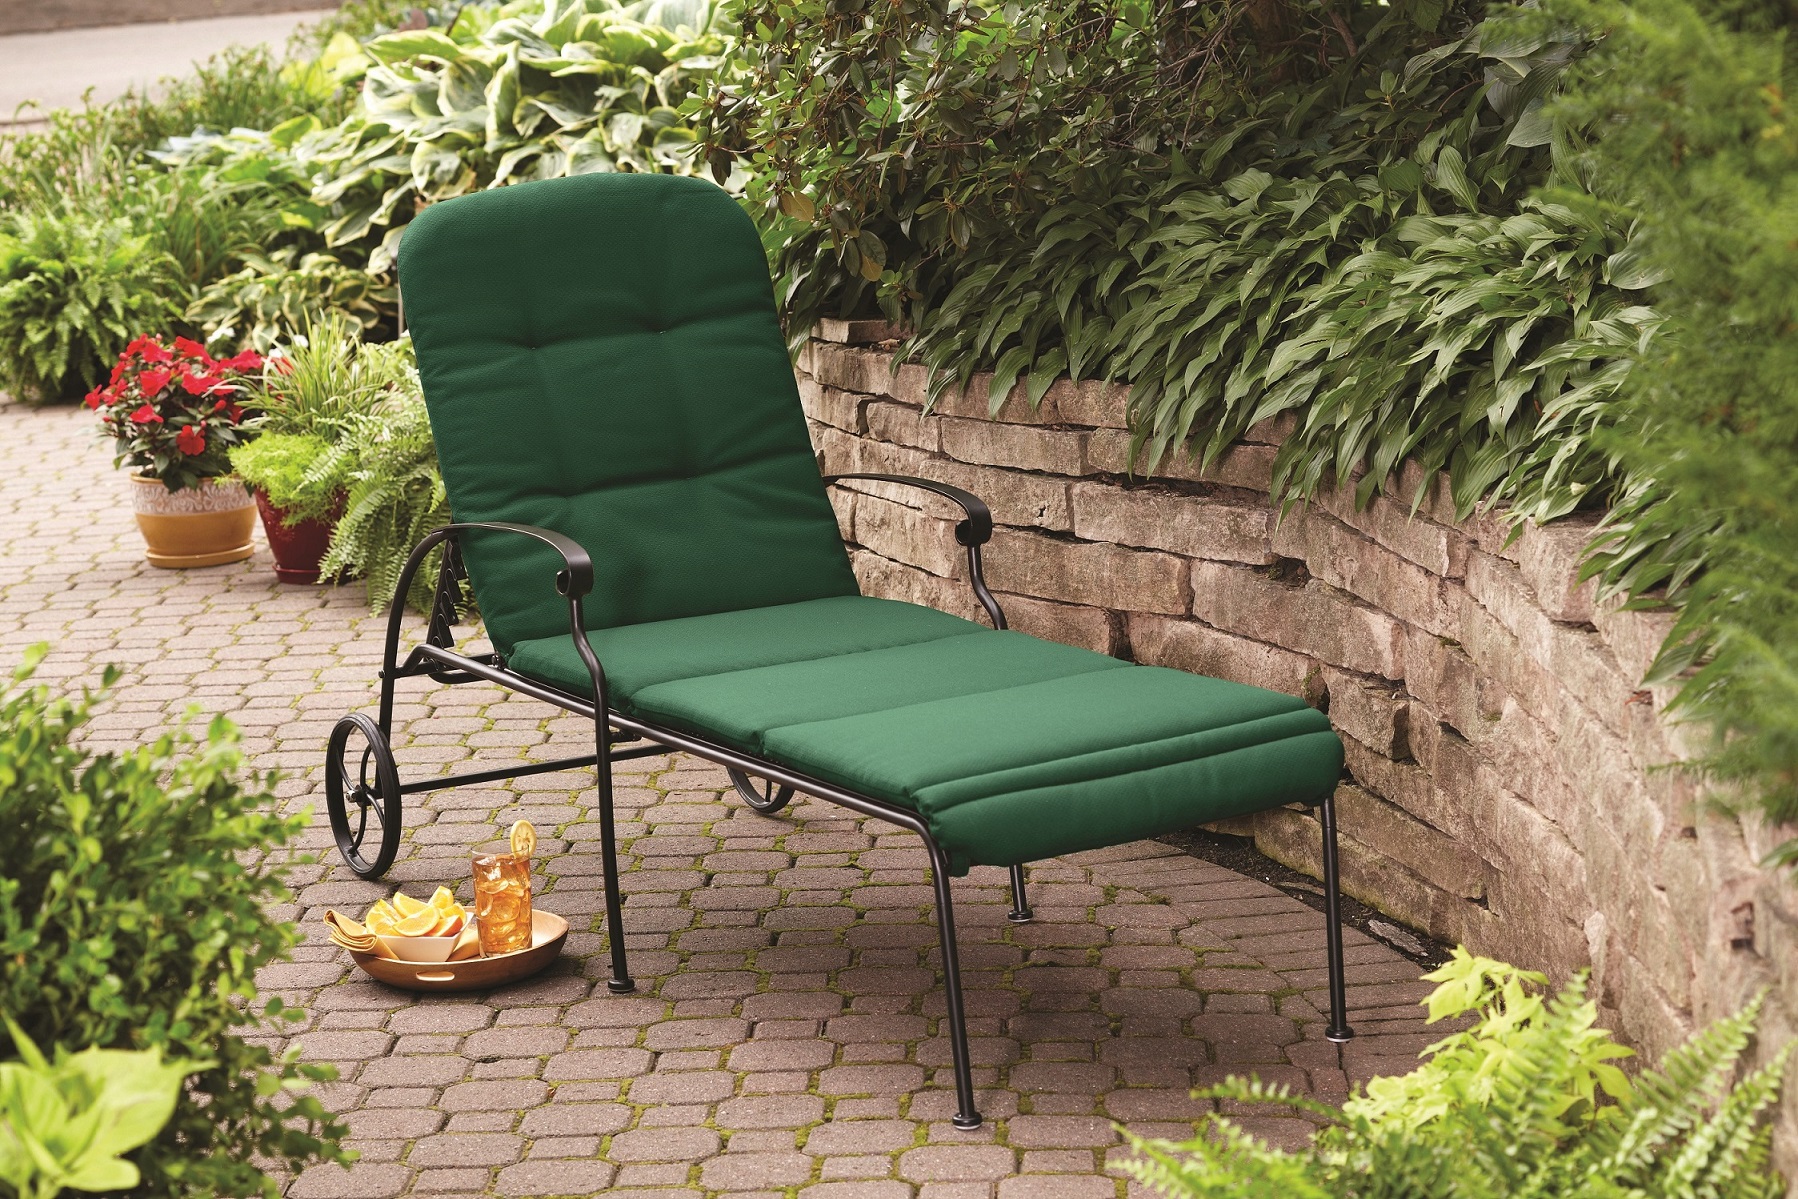 Better Homes & Gardens Clayton Court Multiple Positions Wicker Outdoor Chaise Lounge - Green - image 3 of 6